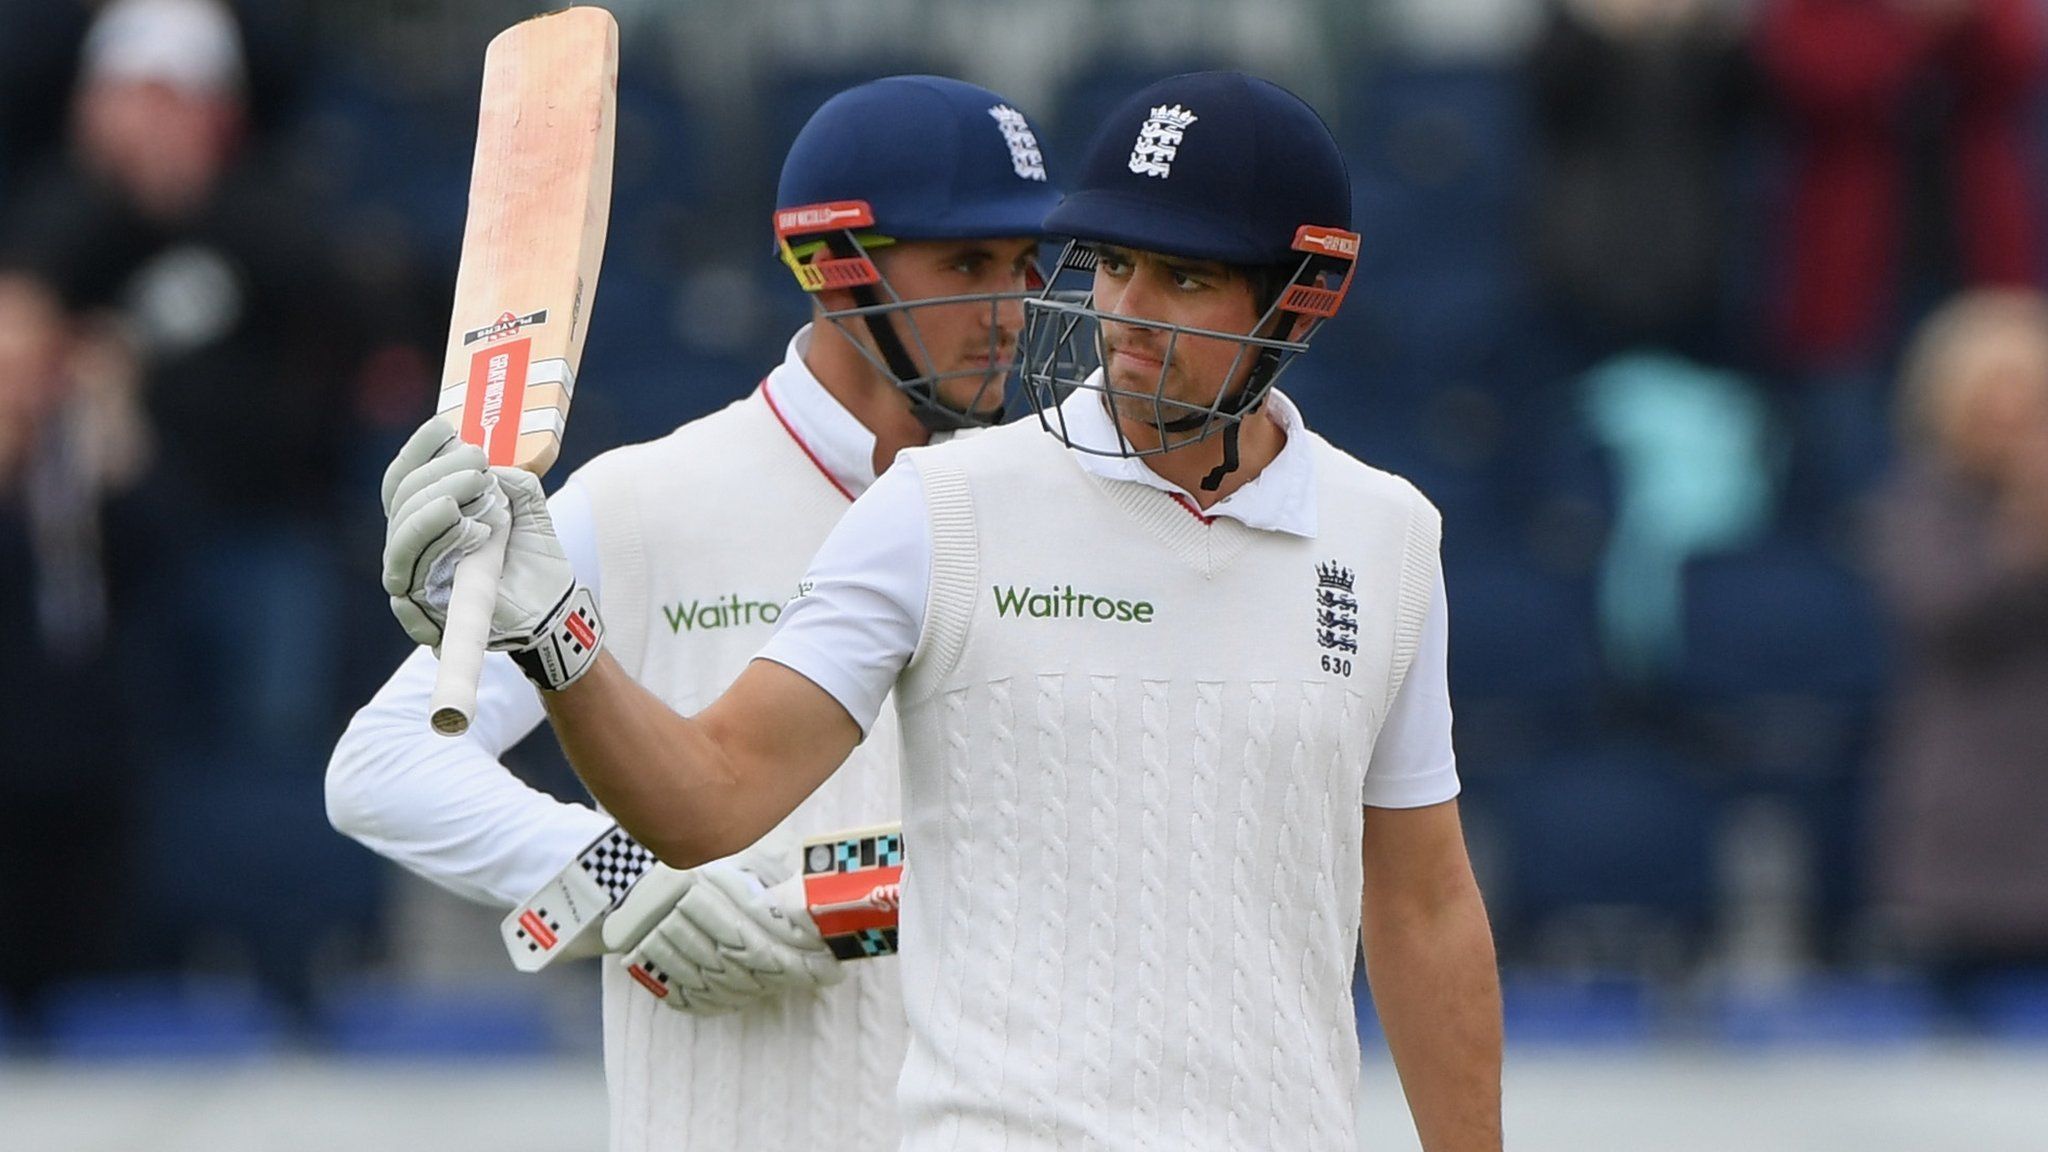 England captain Alastair Cook reached 10,000 Test runs during the series win over Sri Lanka